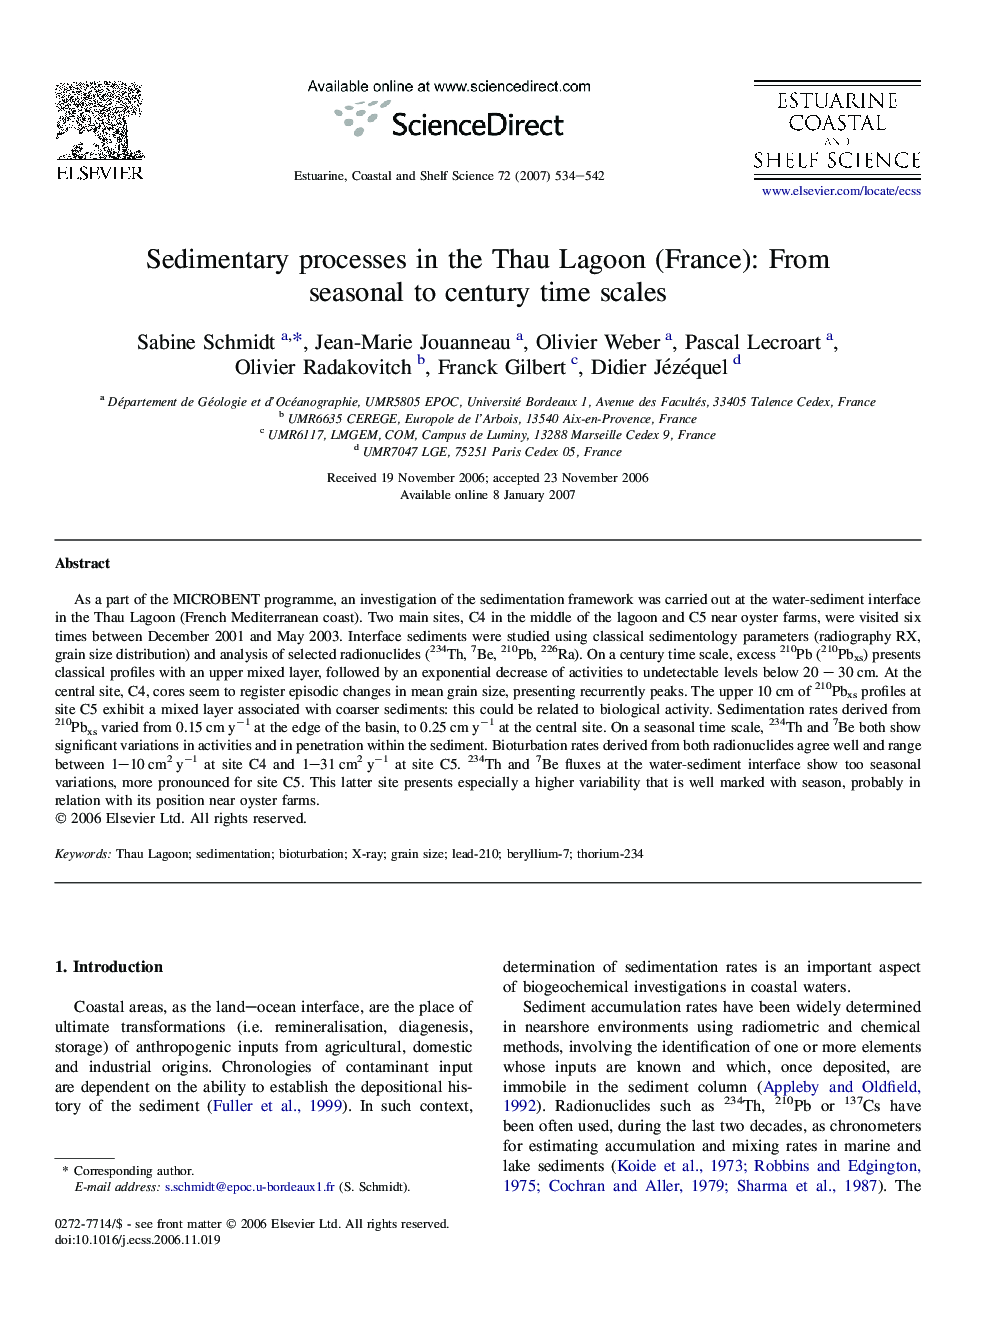 Sedimentary processes in the Thau Lagoon (France): From seasonal to century time scales